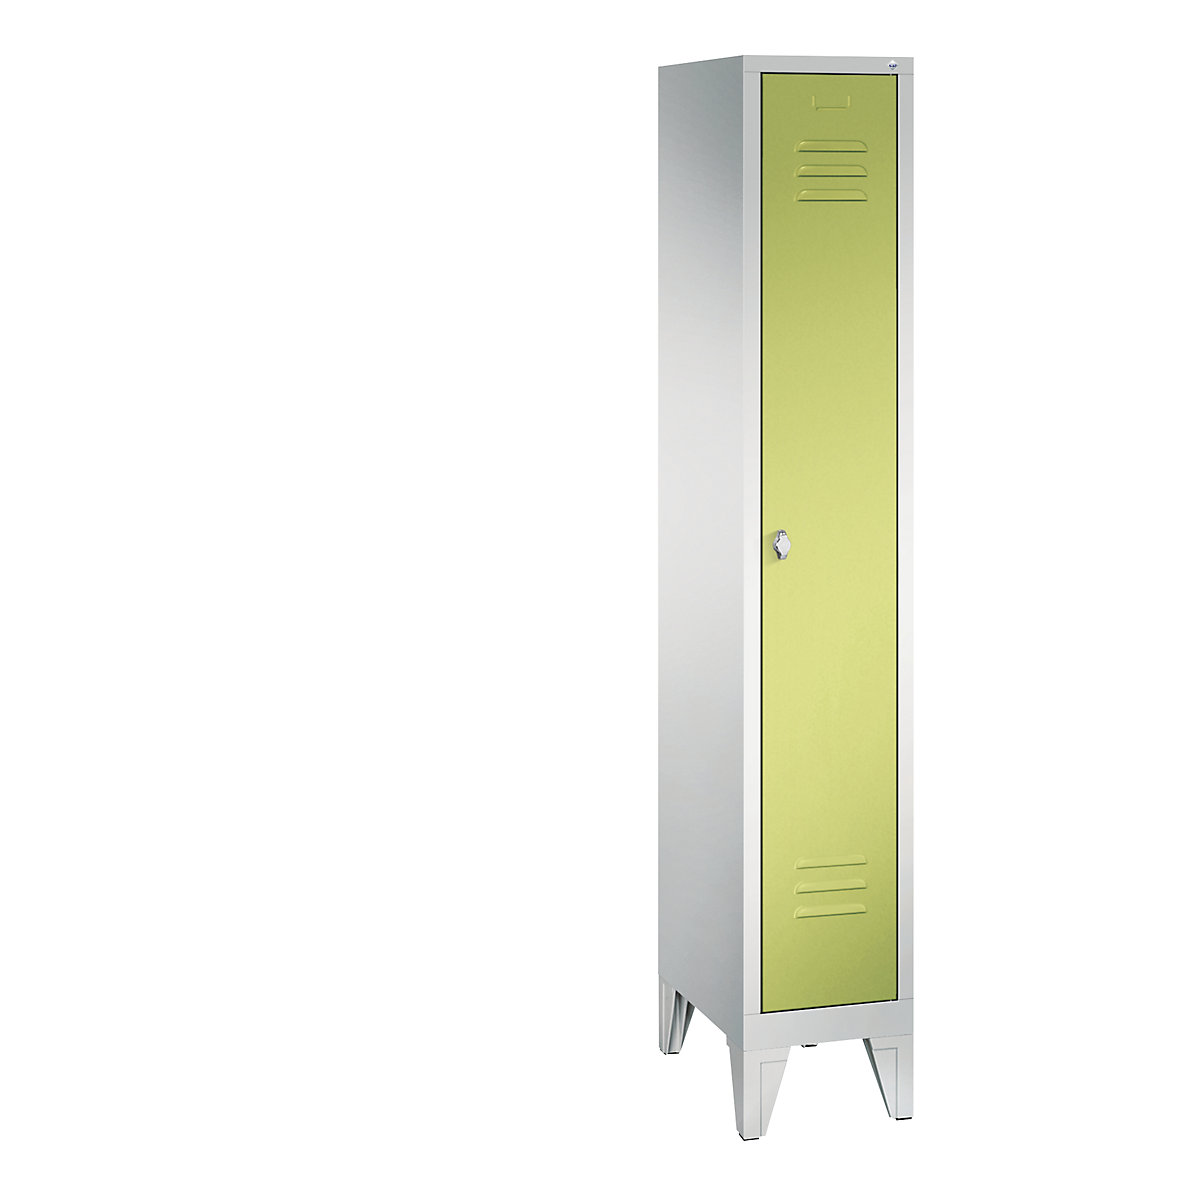 CLASSIC cloakroom locker with feet – C+P, 1 compartment, compartment width 300 mm, light grey / viridian green-4